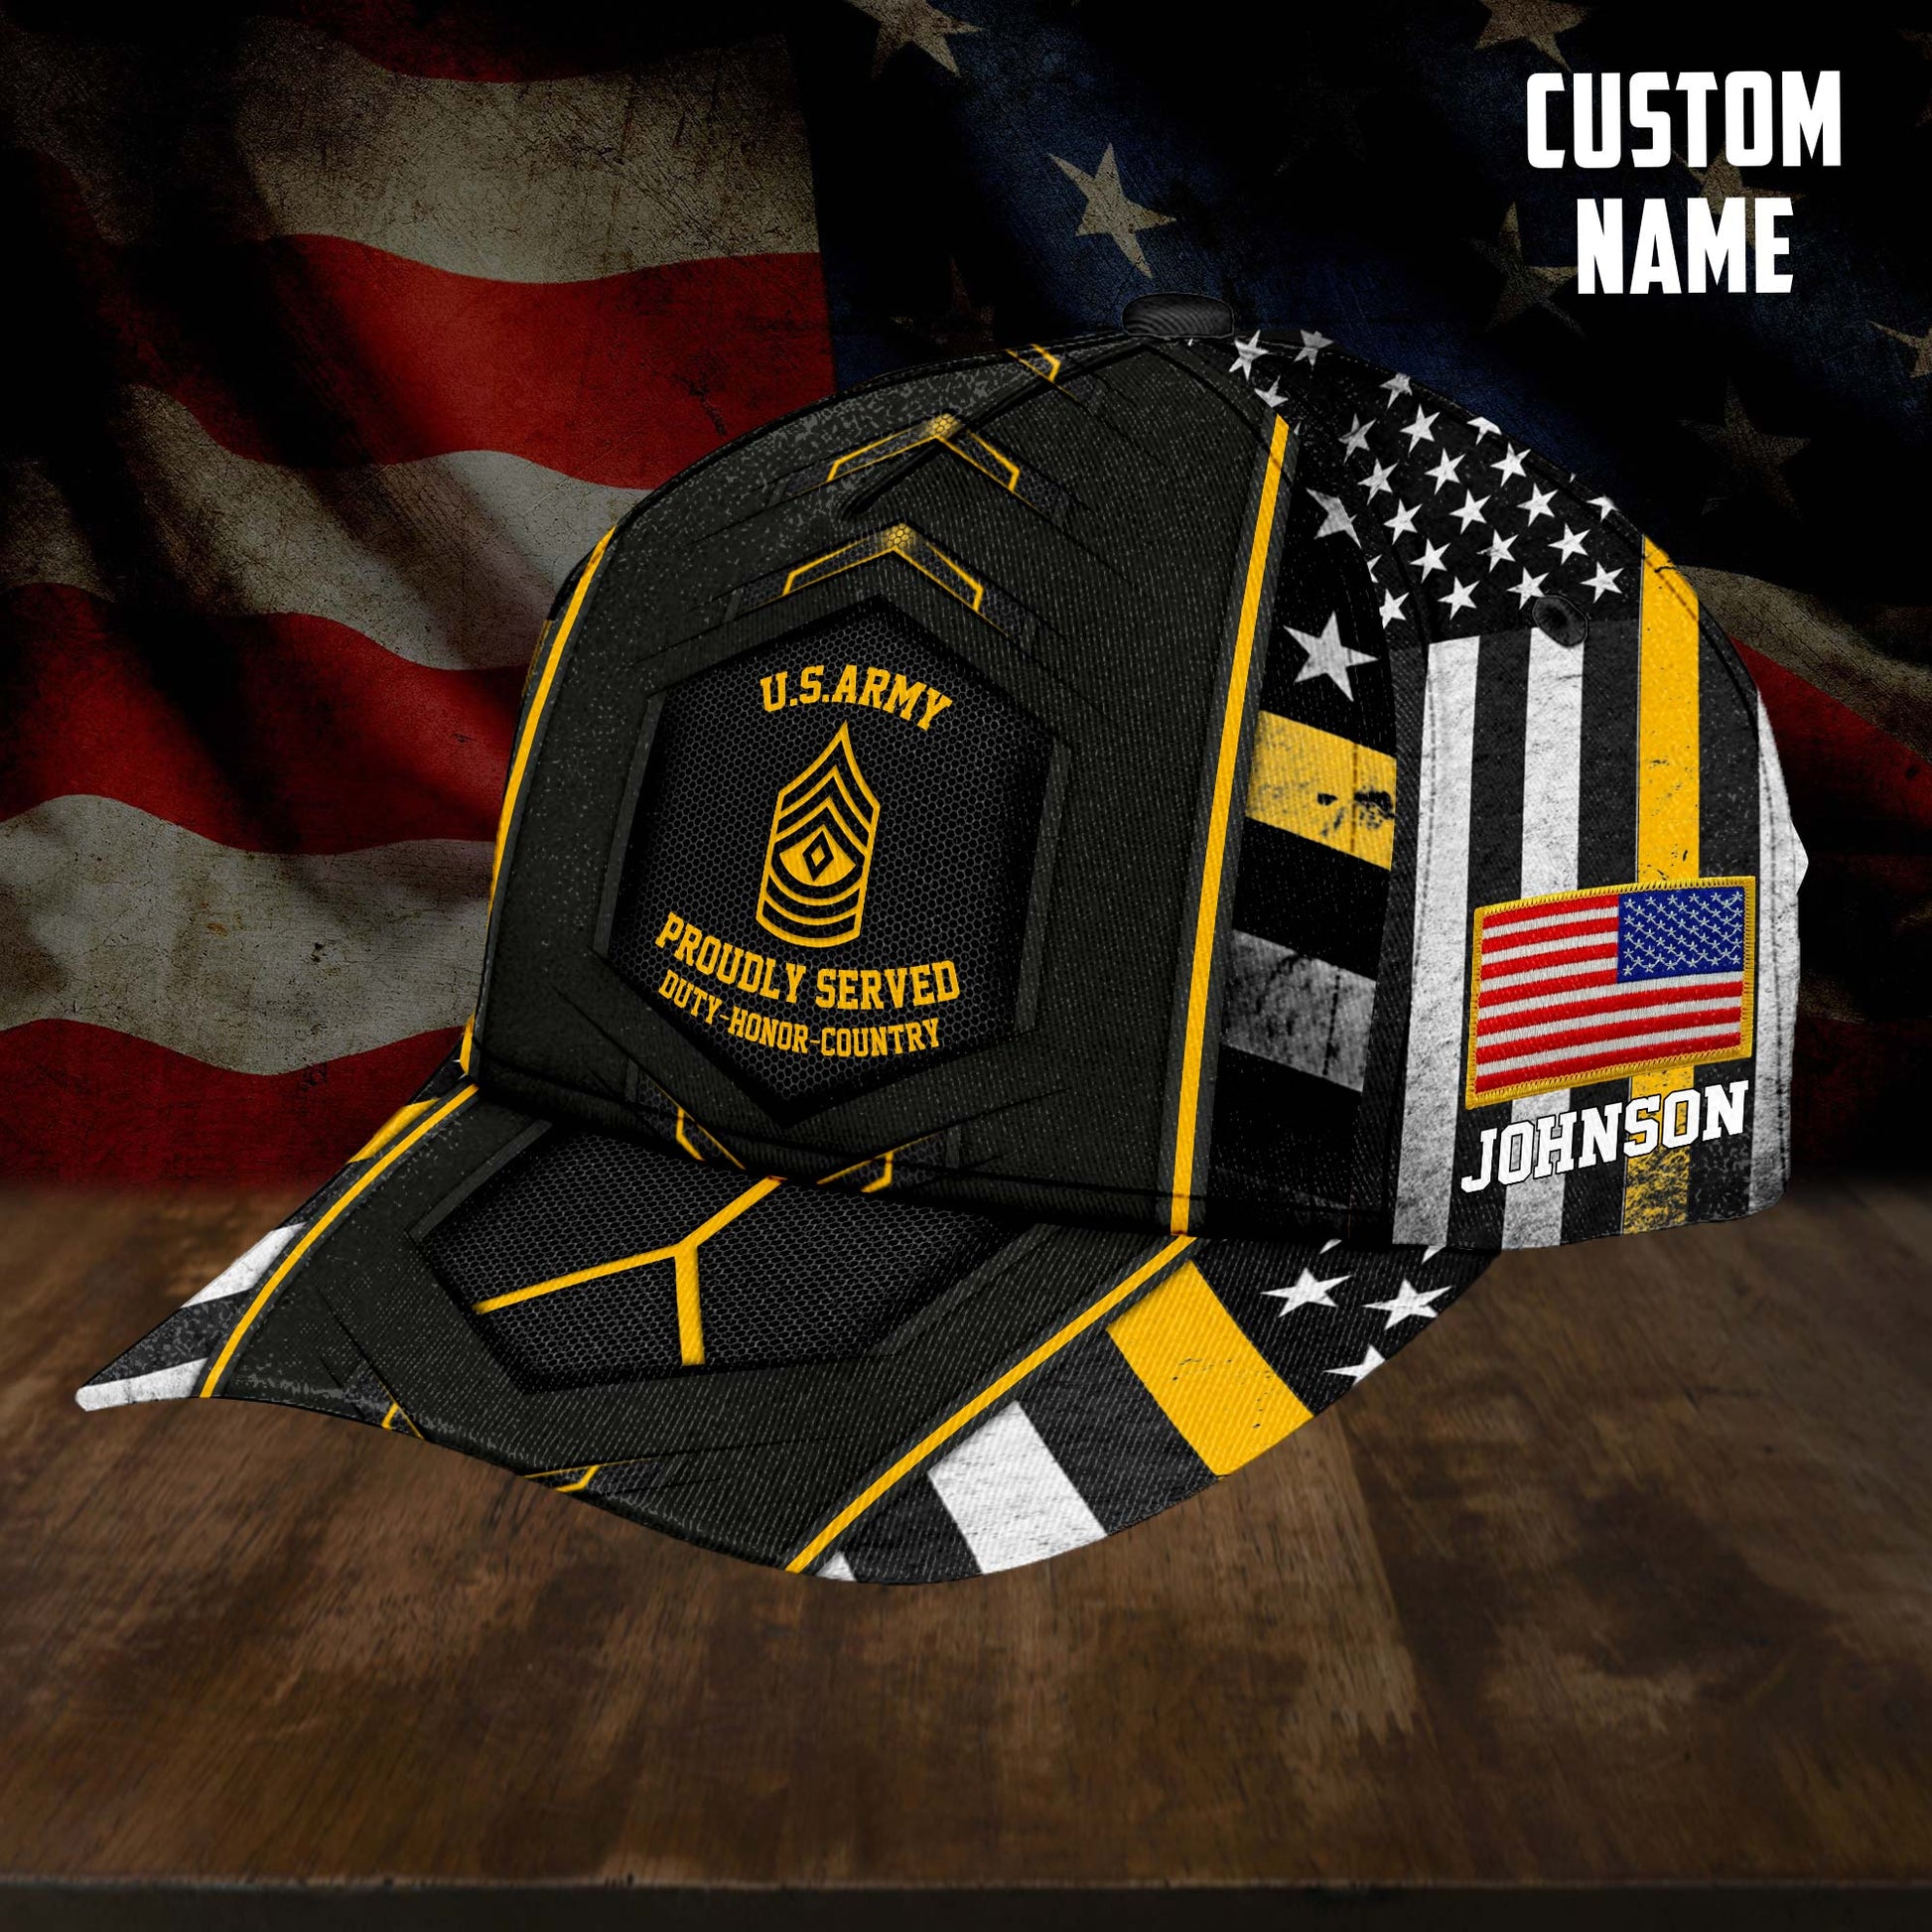 US Army Baseball Caps Honor Country, Custom Army Hats, Personalized Name and Rank Veterans,Cap for Military